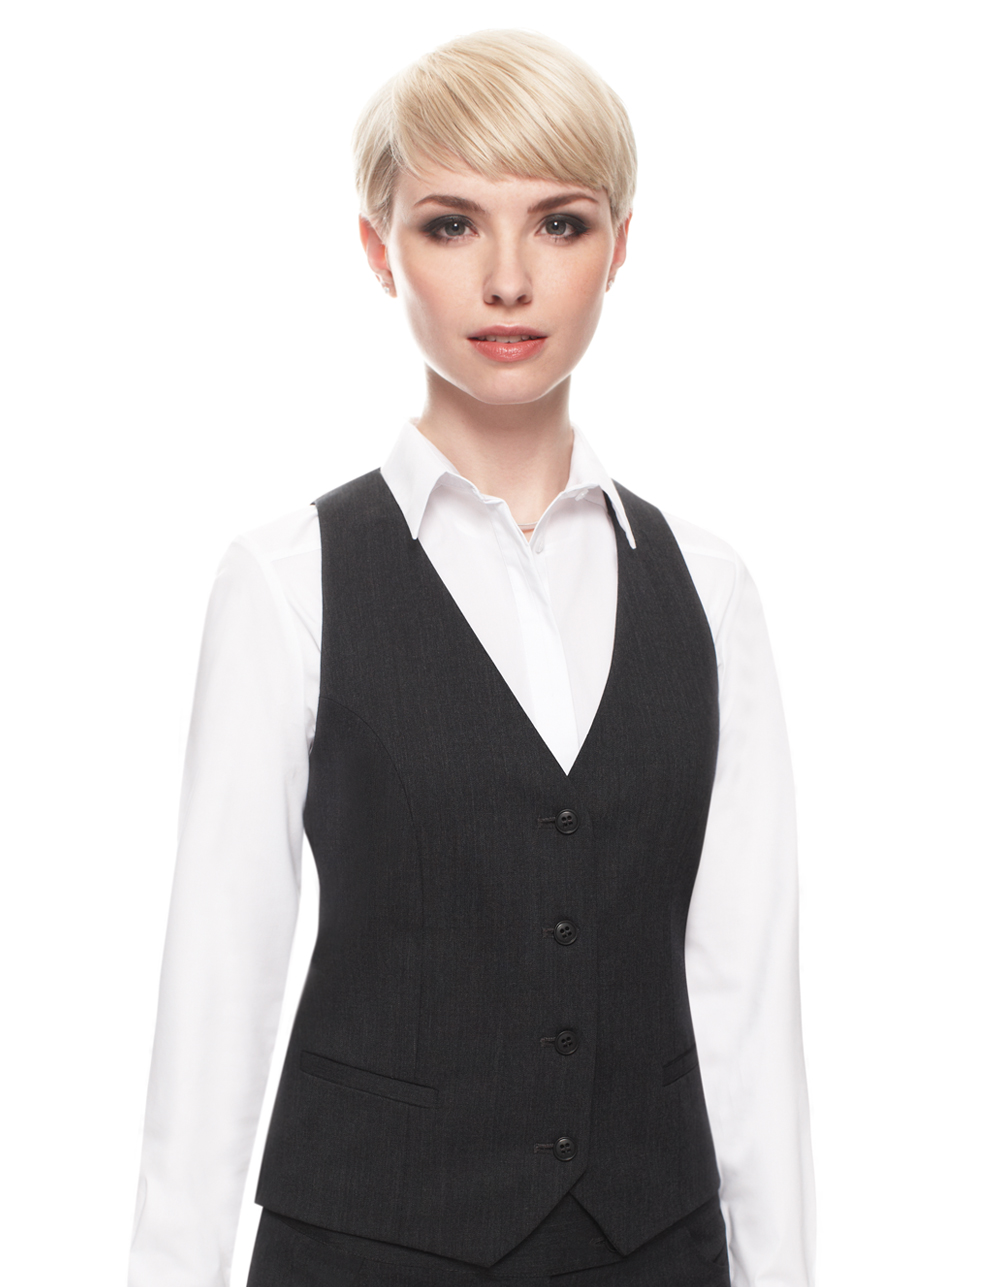 Strand Womens Waistcoat | Corporate Clothing, Uniforms & Workwear Supplier  - Corporate Dressing Uniforms